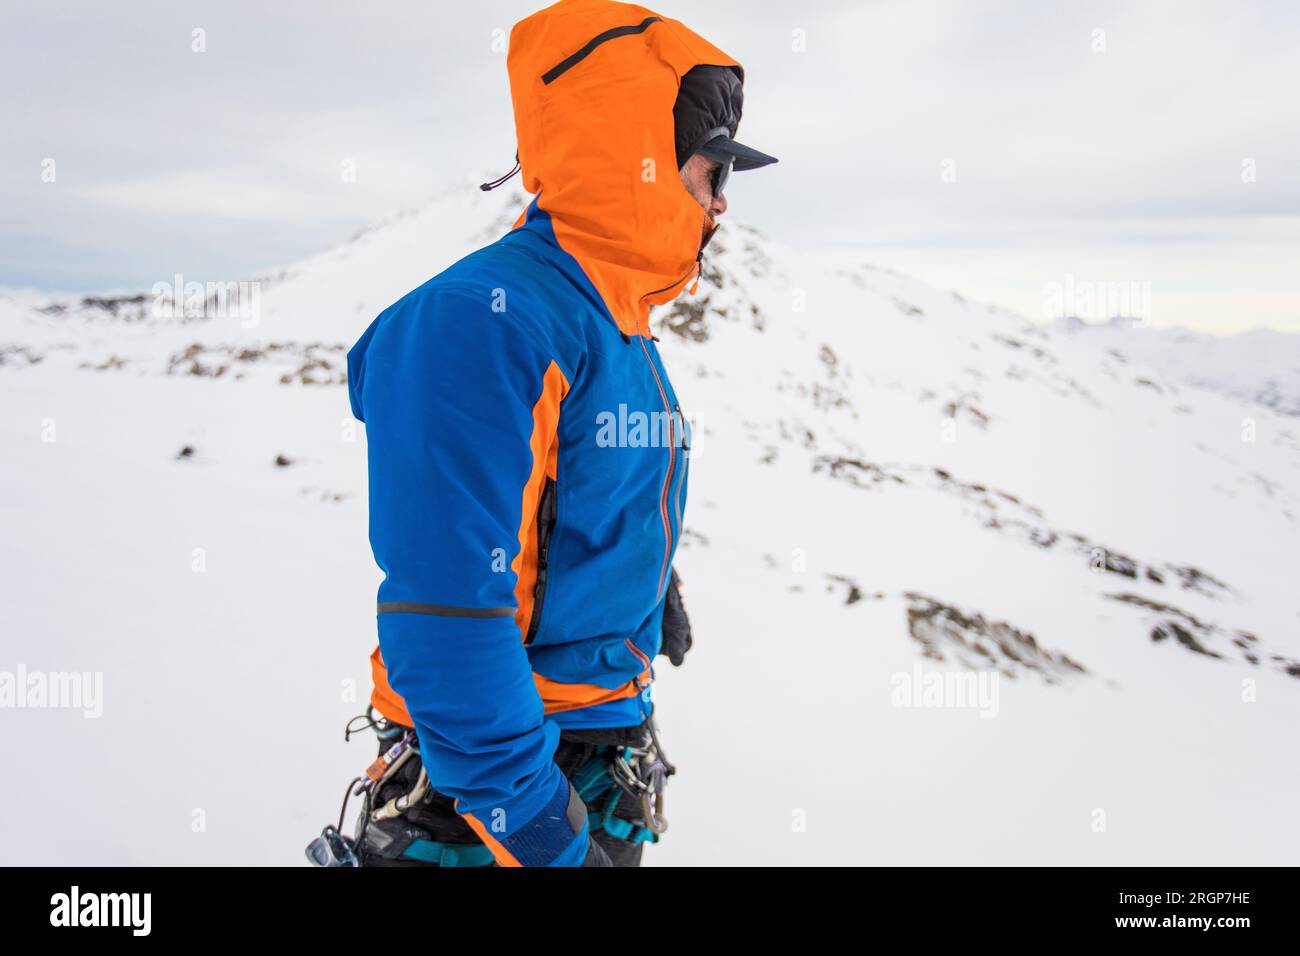 Side view of man on windy mountain summit, warm clothing Stock Photo